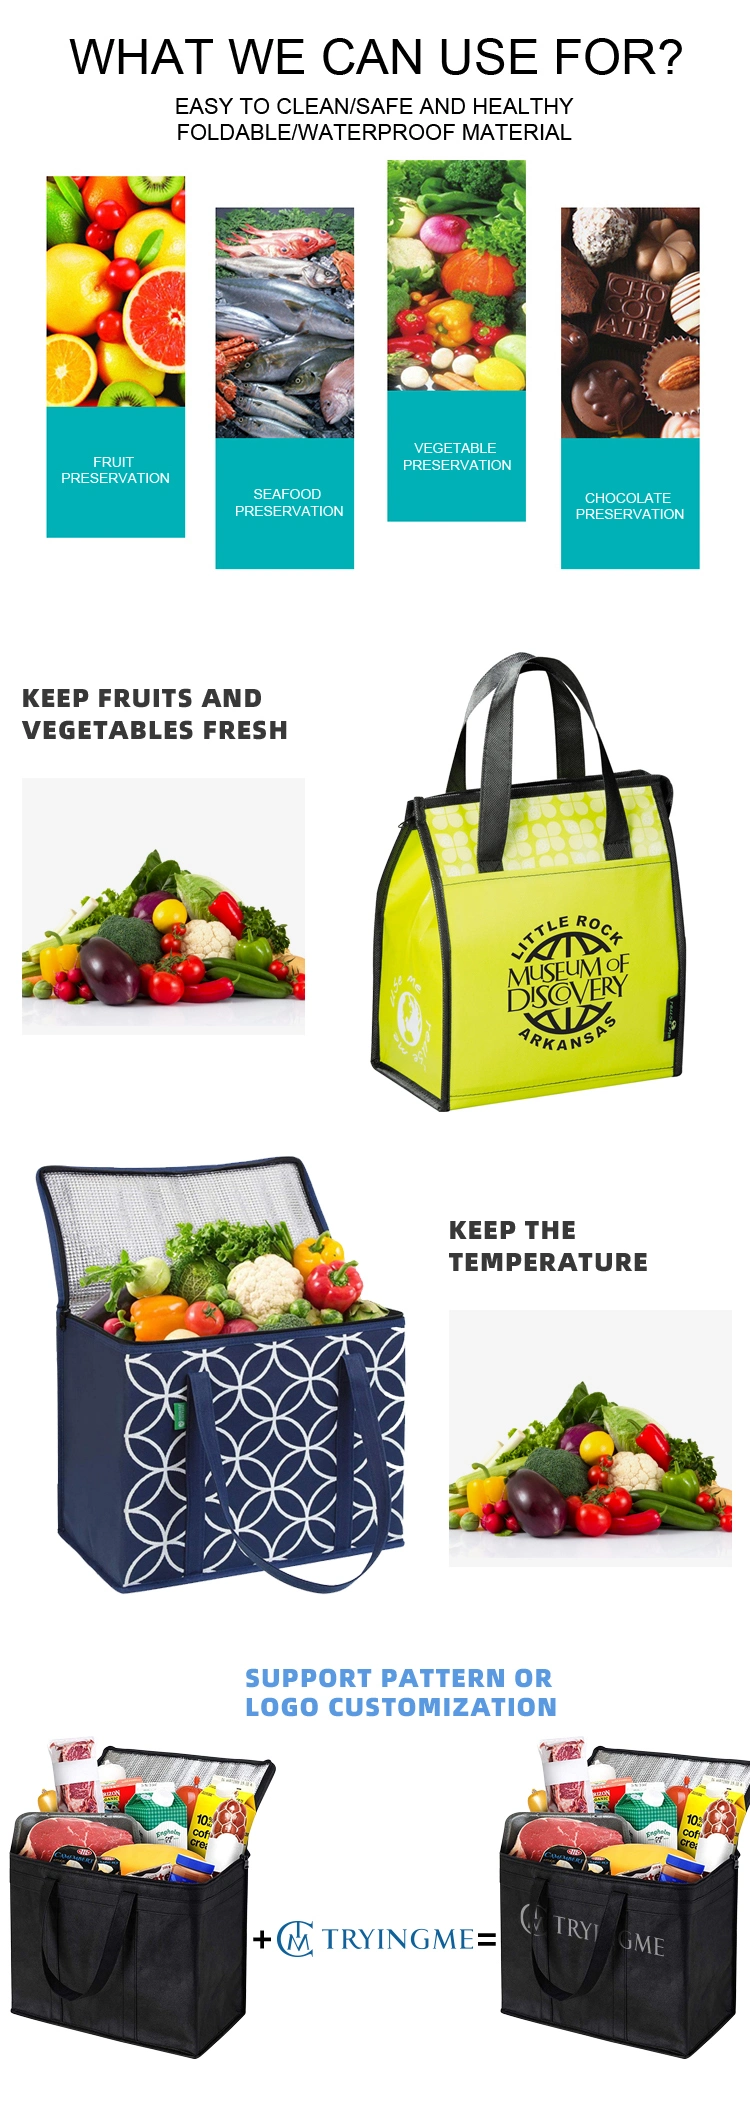 Custom Logo Reusable Tote Take Away Food Delivery Bag, Grocery Thermal Shopping Bag Insulated Cooler Bag